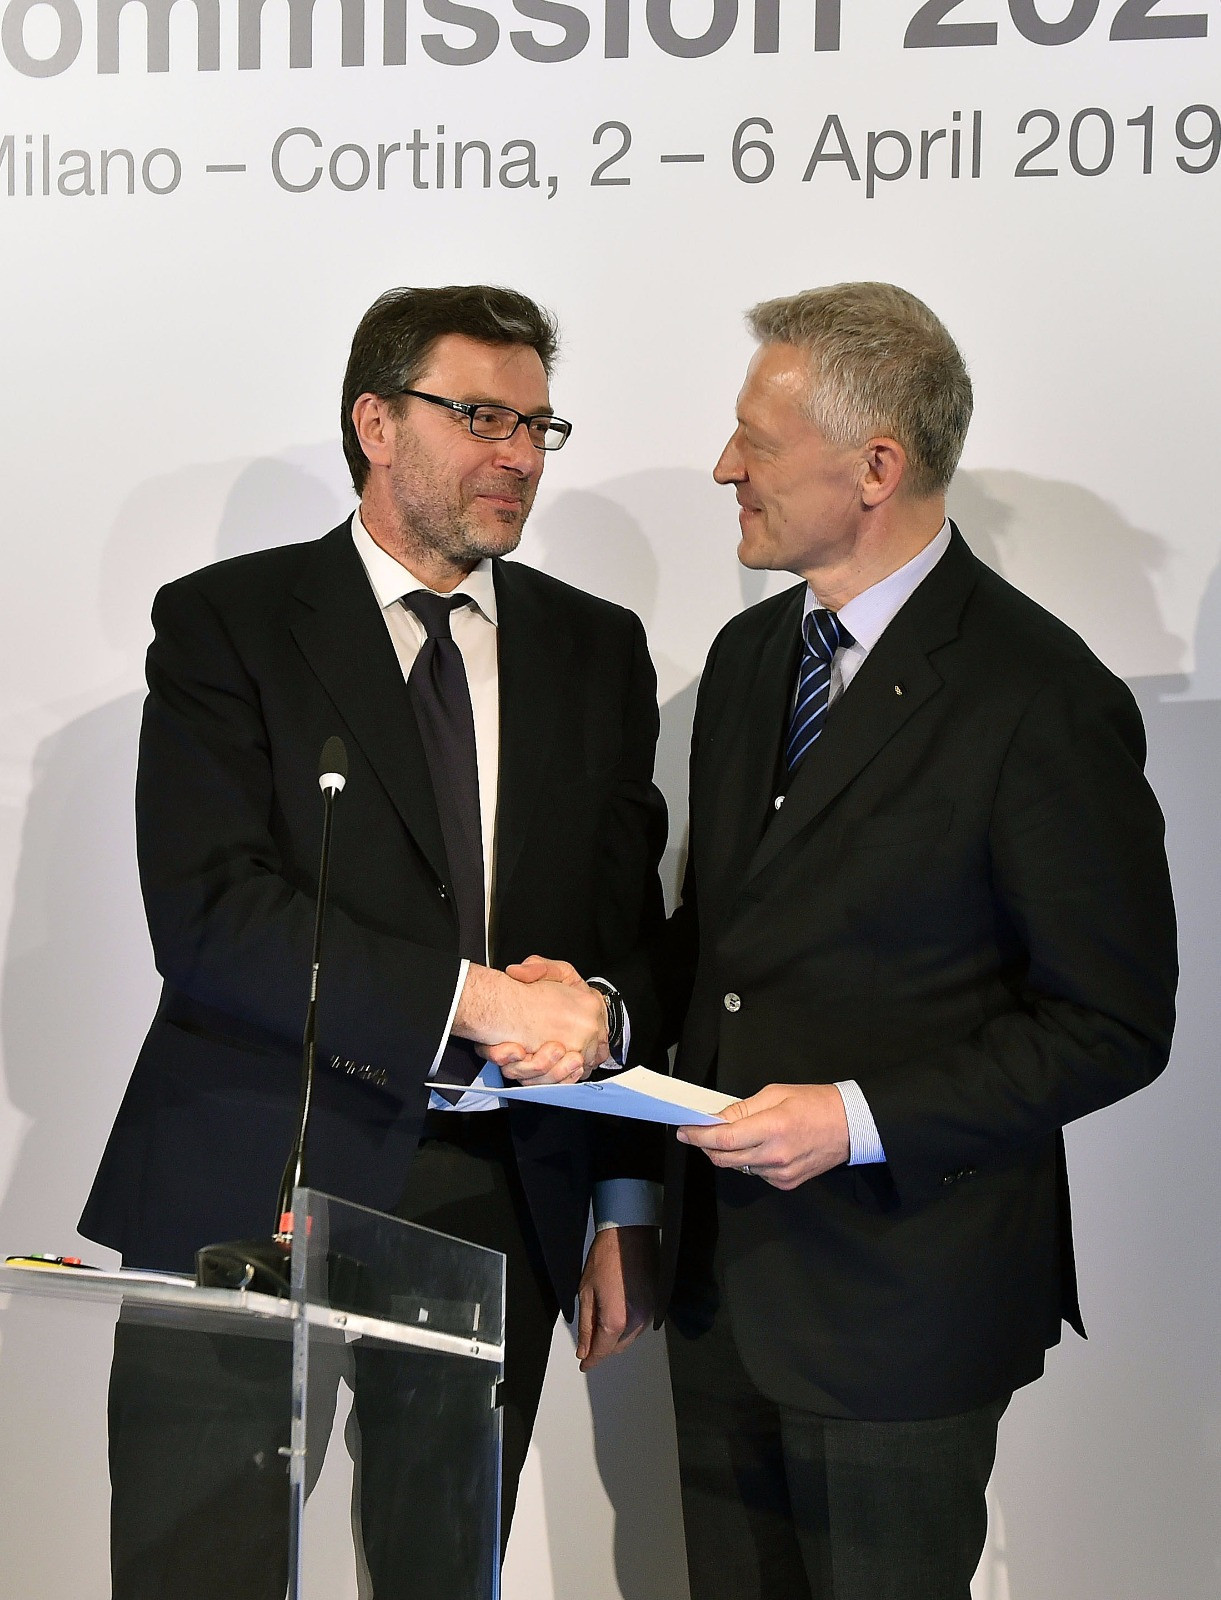 Italy's Sports Secretary Giancarlo Giorgetti delivered a letter from the country's Prime Minister to IOC Evaluation Commission Octavian Morariu confirming they will meet the financial guarantees for Milan Cortina 2026 ©Milan Cortina 2026